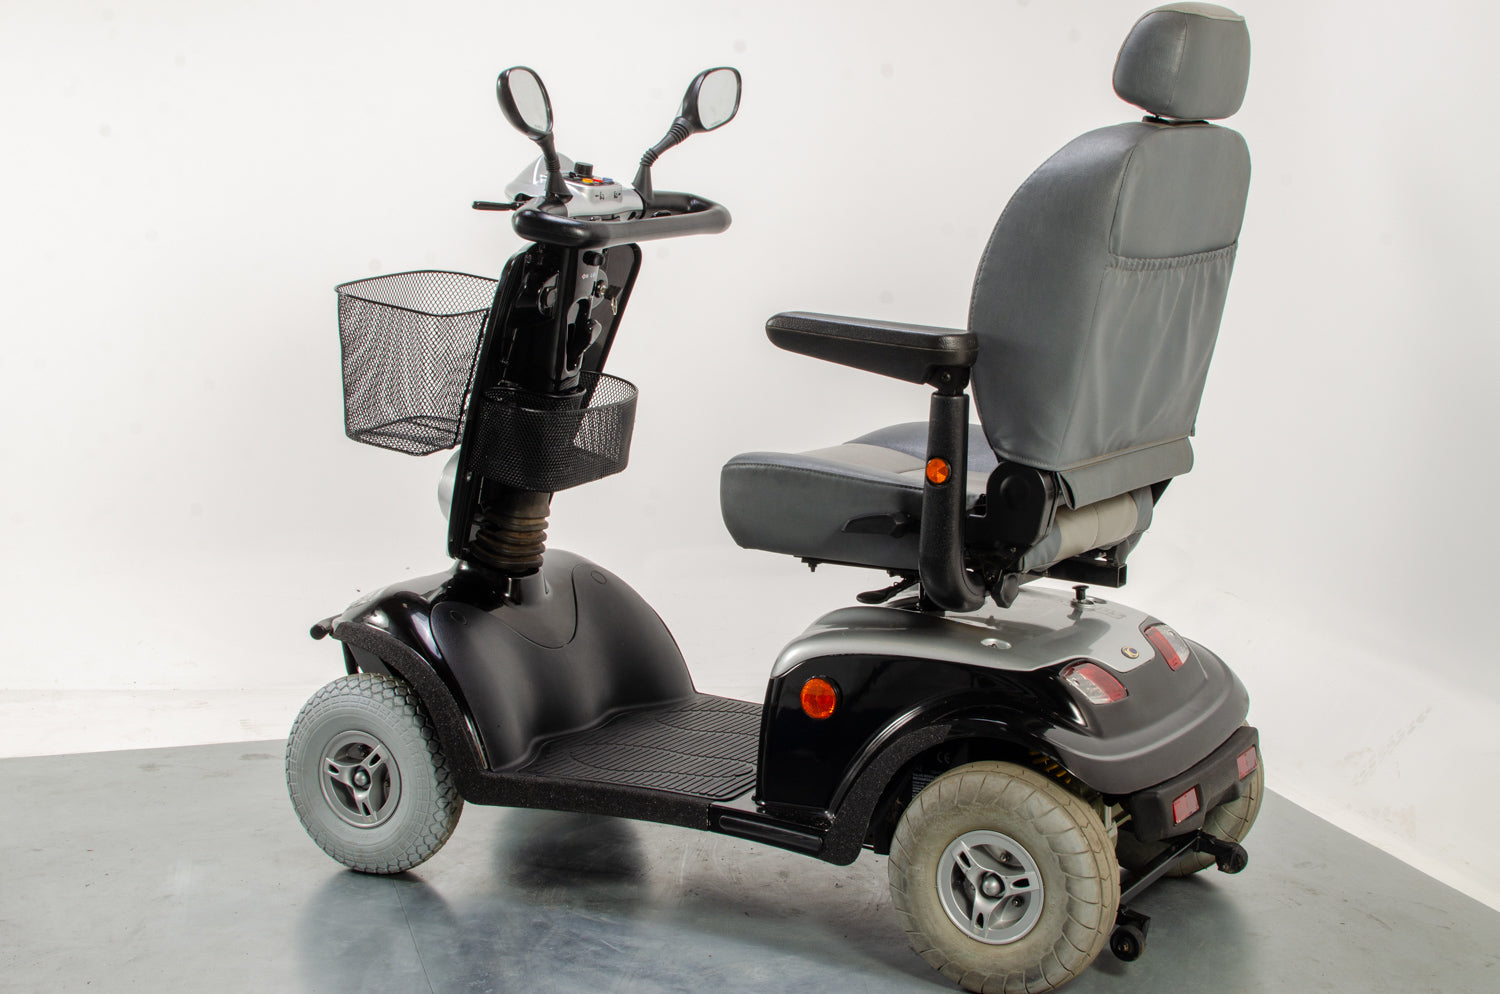 Kymco Maxi XLS Used Mobility Scooter 8mph Large All-Terrain Suspension